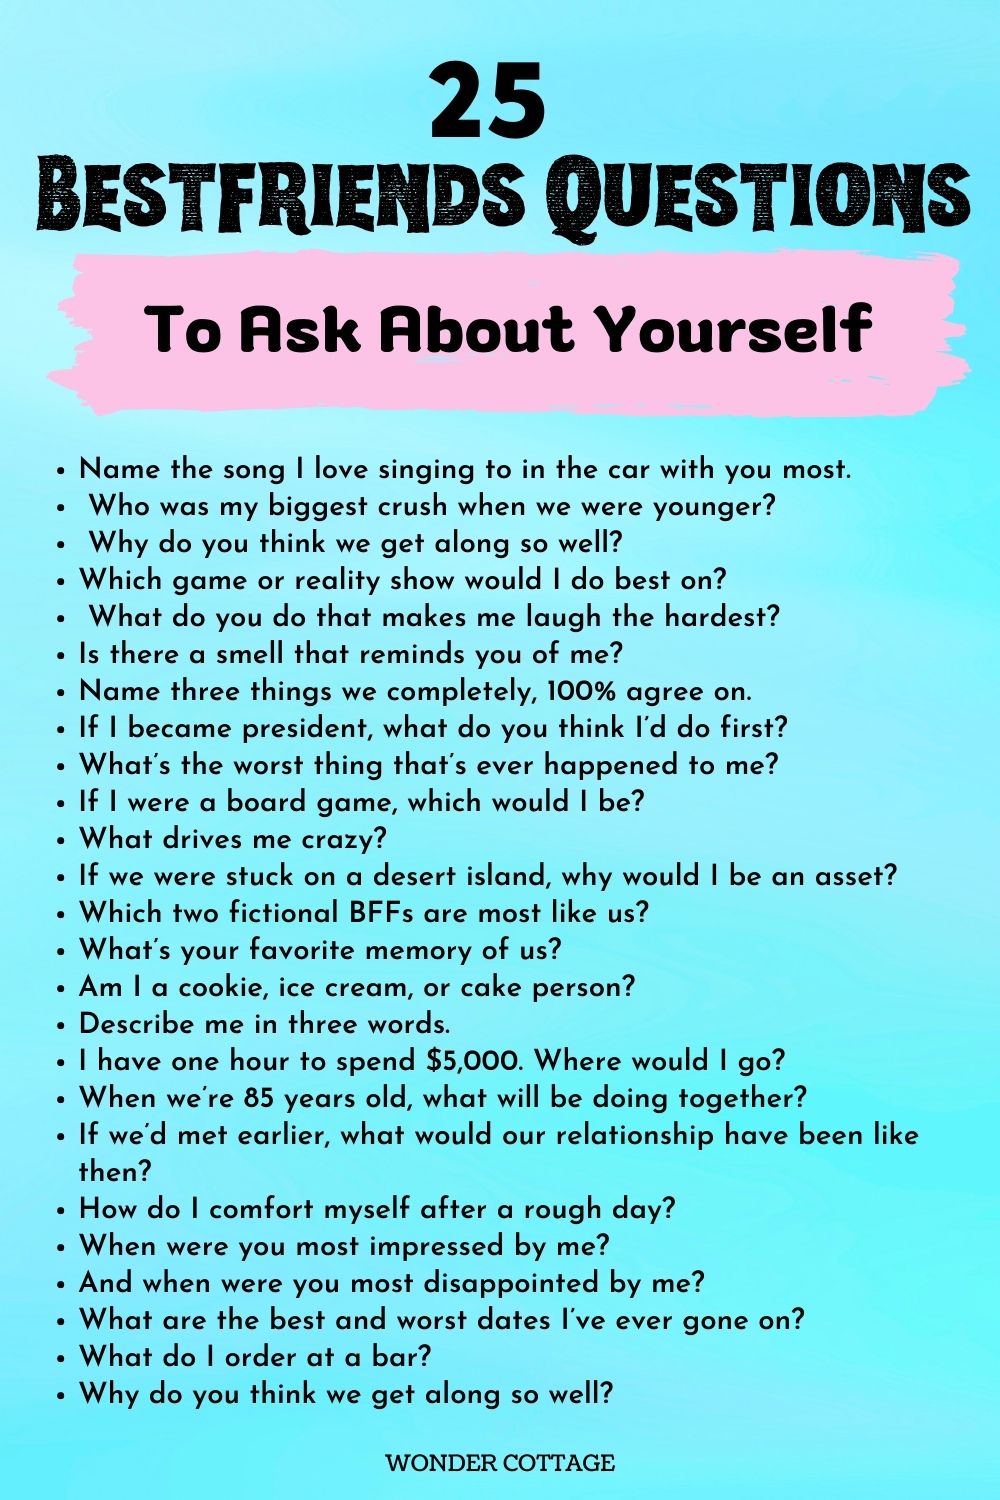 Bestfriends Questions To Ask About Yourself